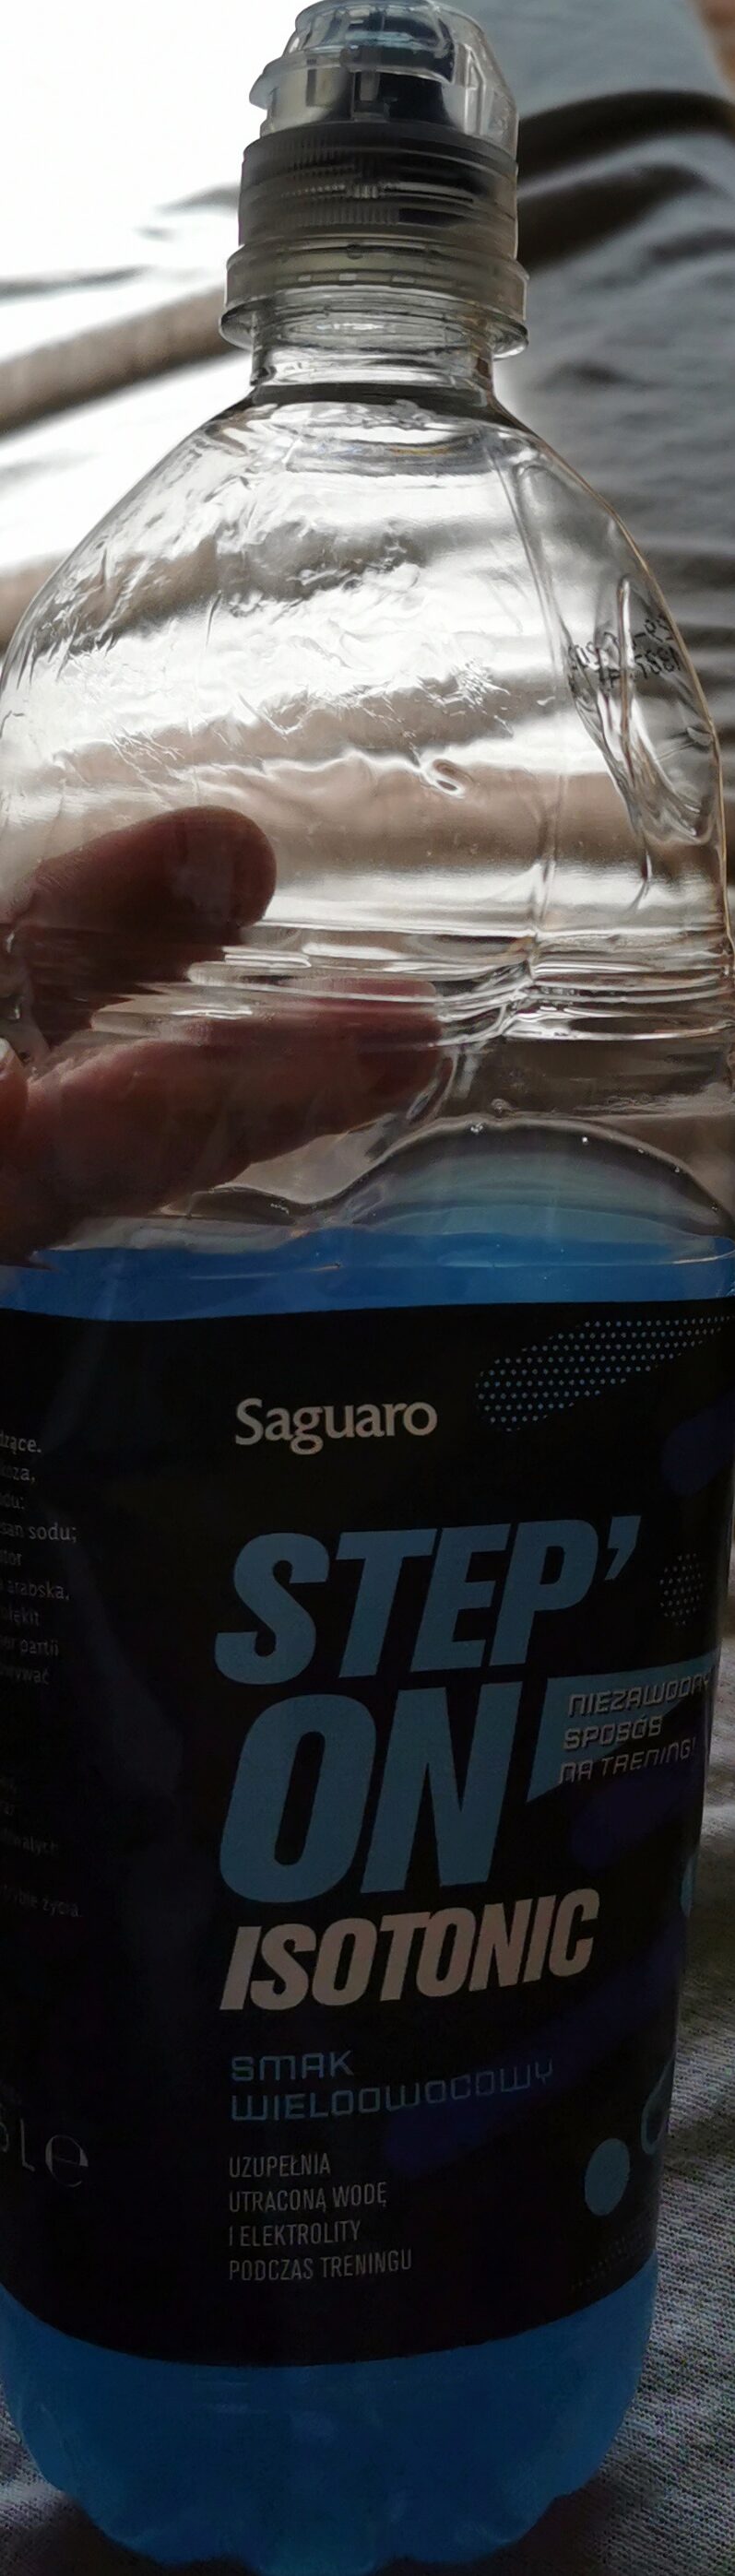 Step'on isotonic - Produkt